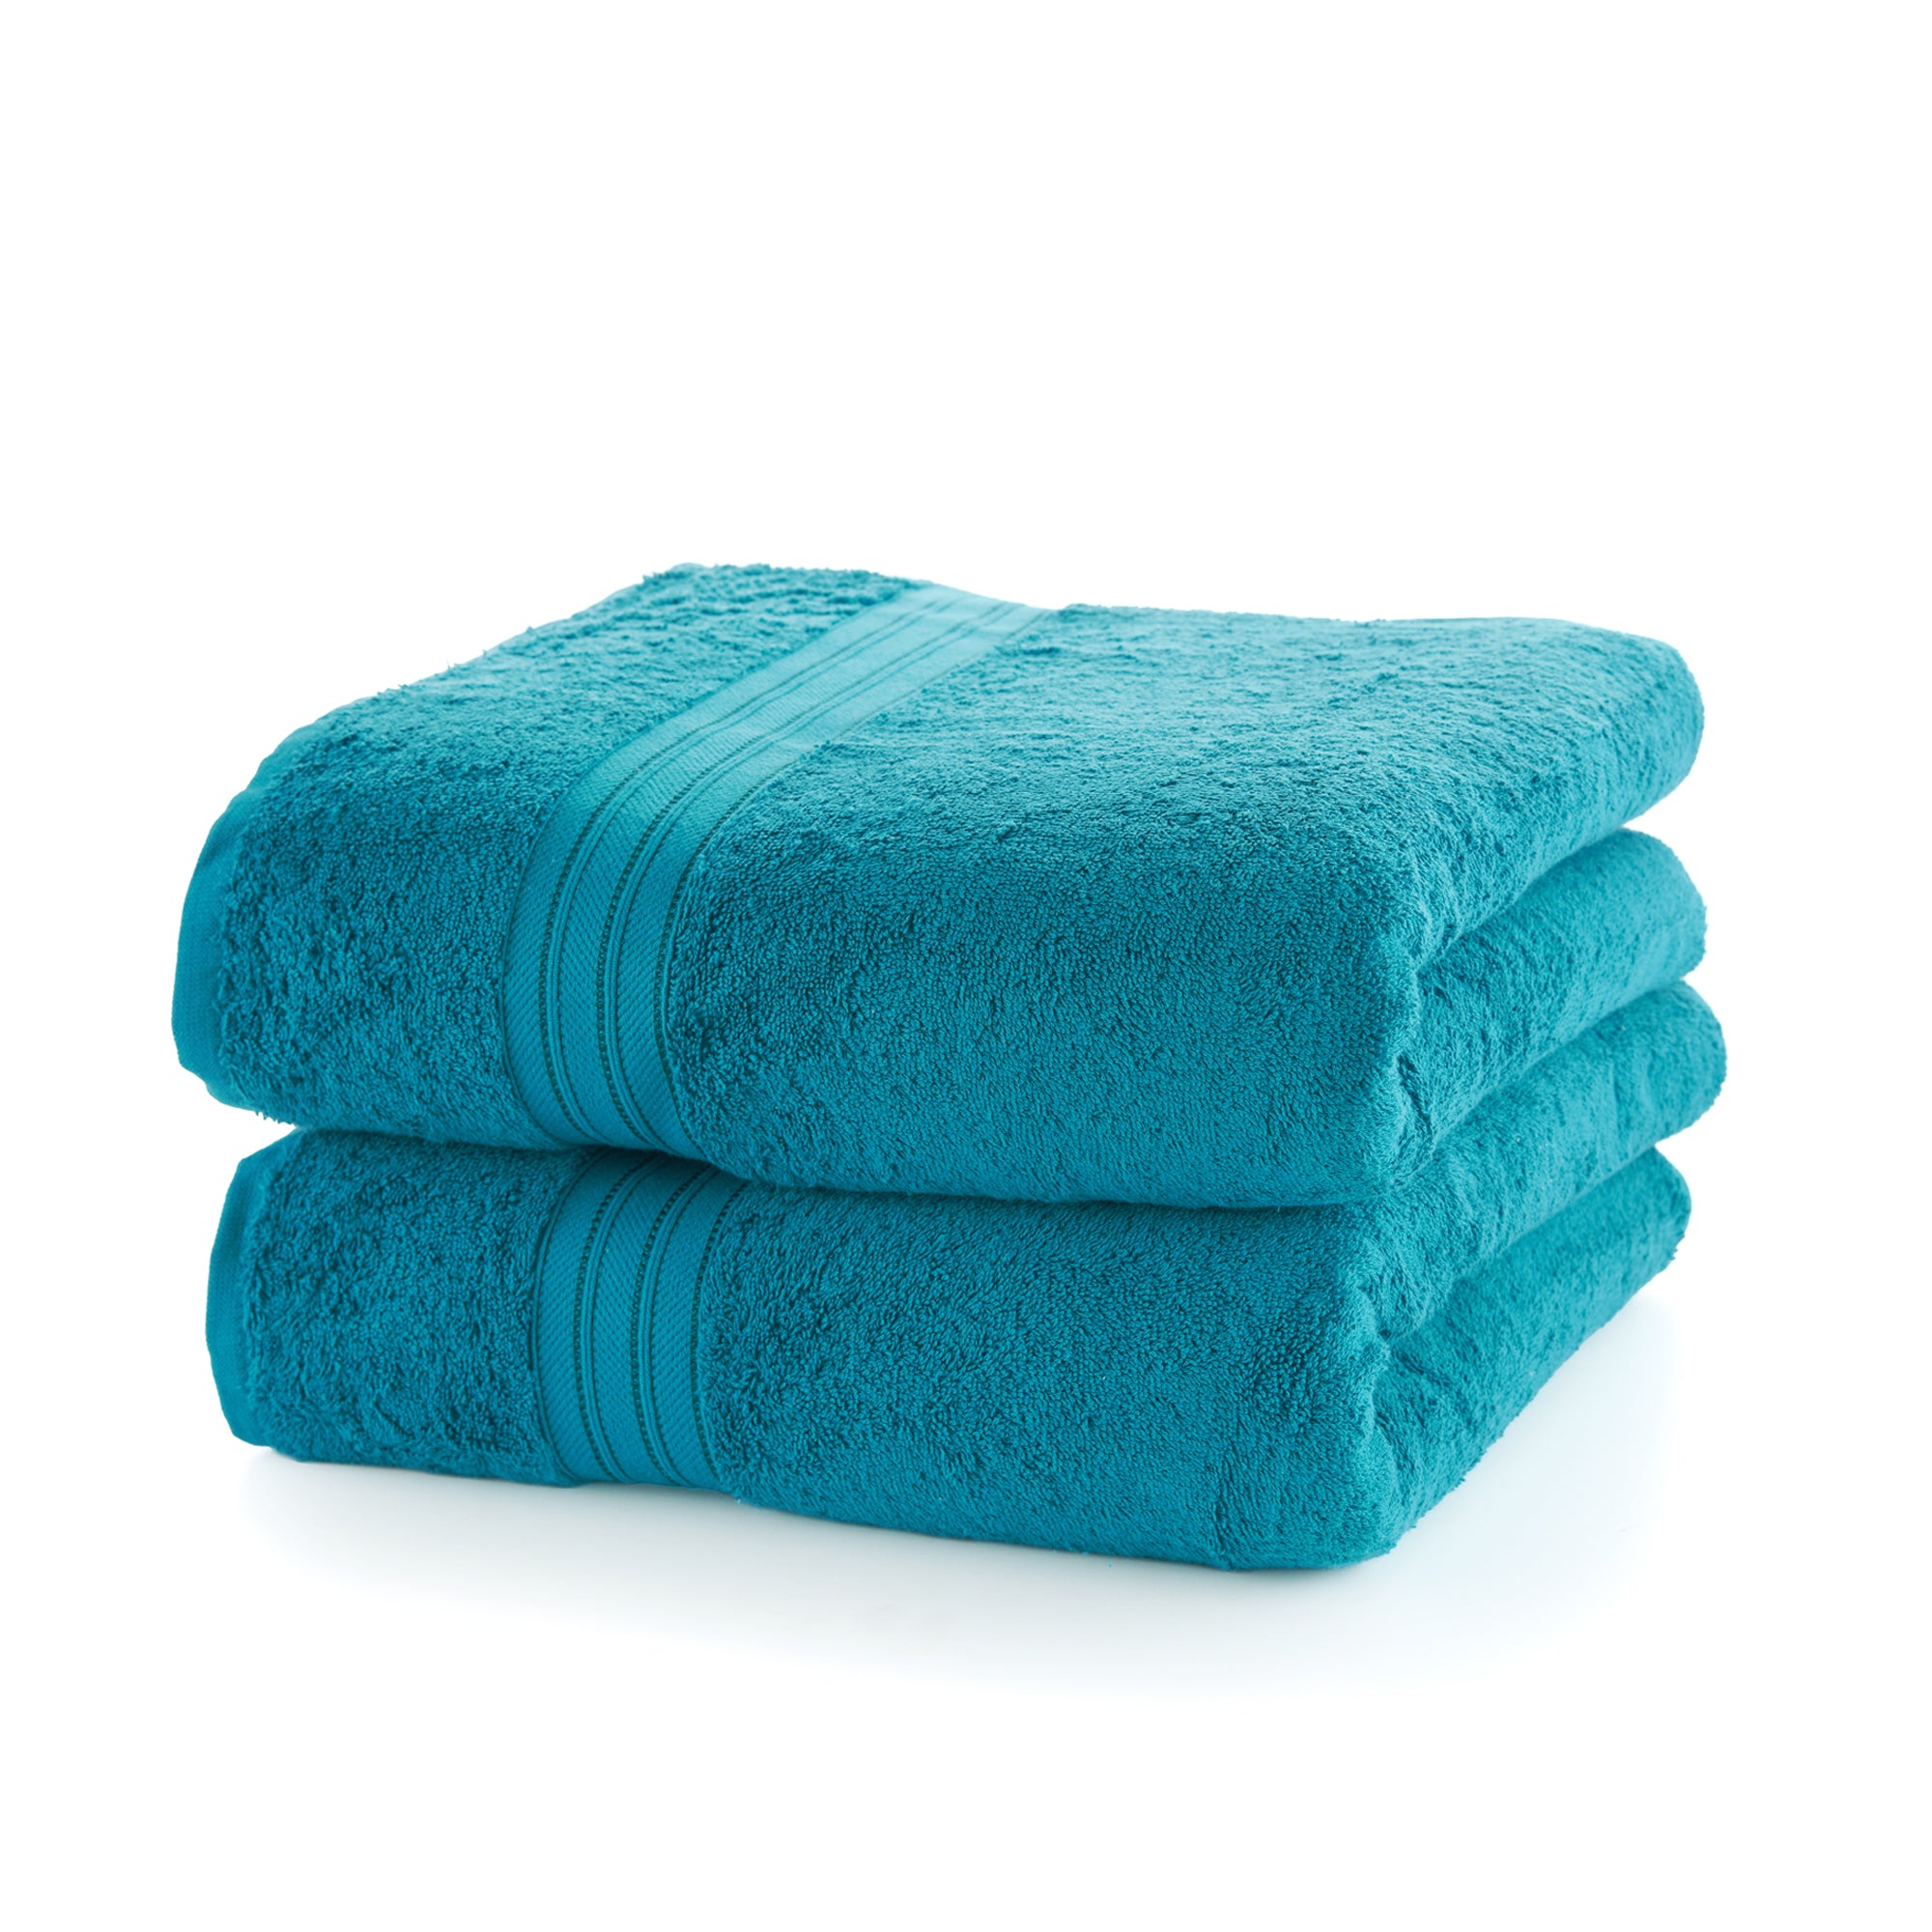 Bath Towels and Sheets, 100% Terry Cotton – Mellanni